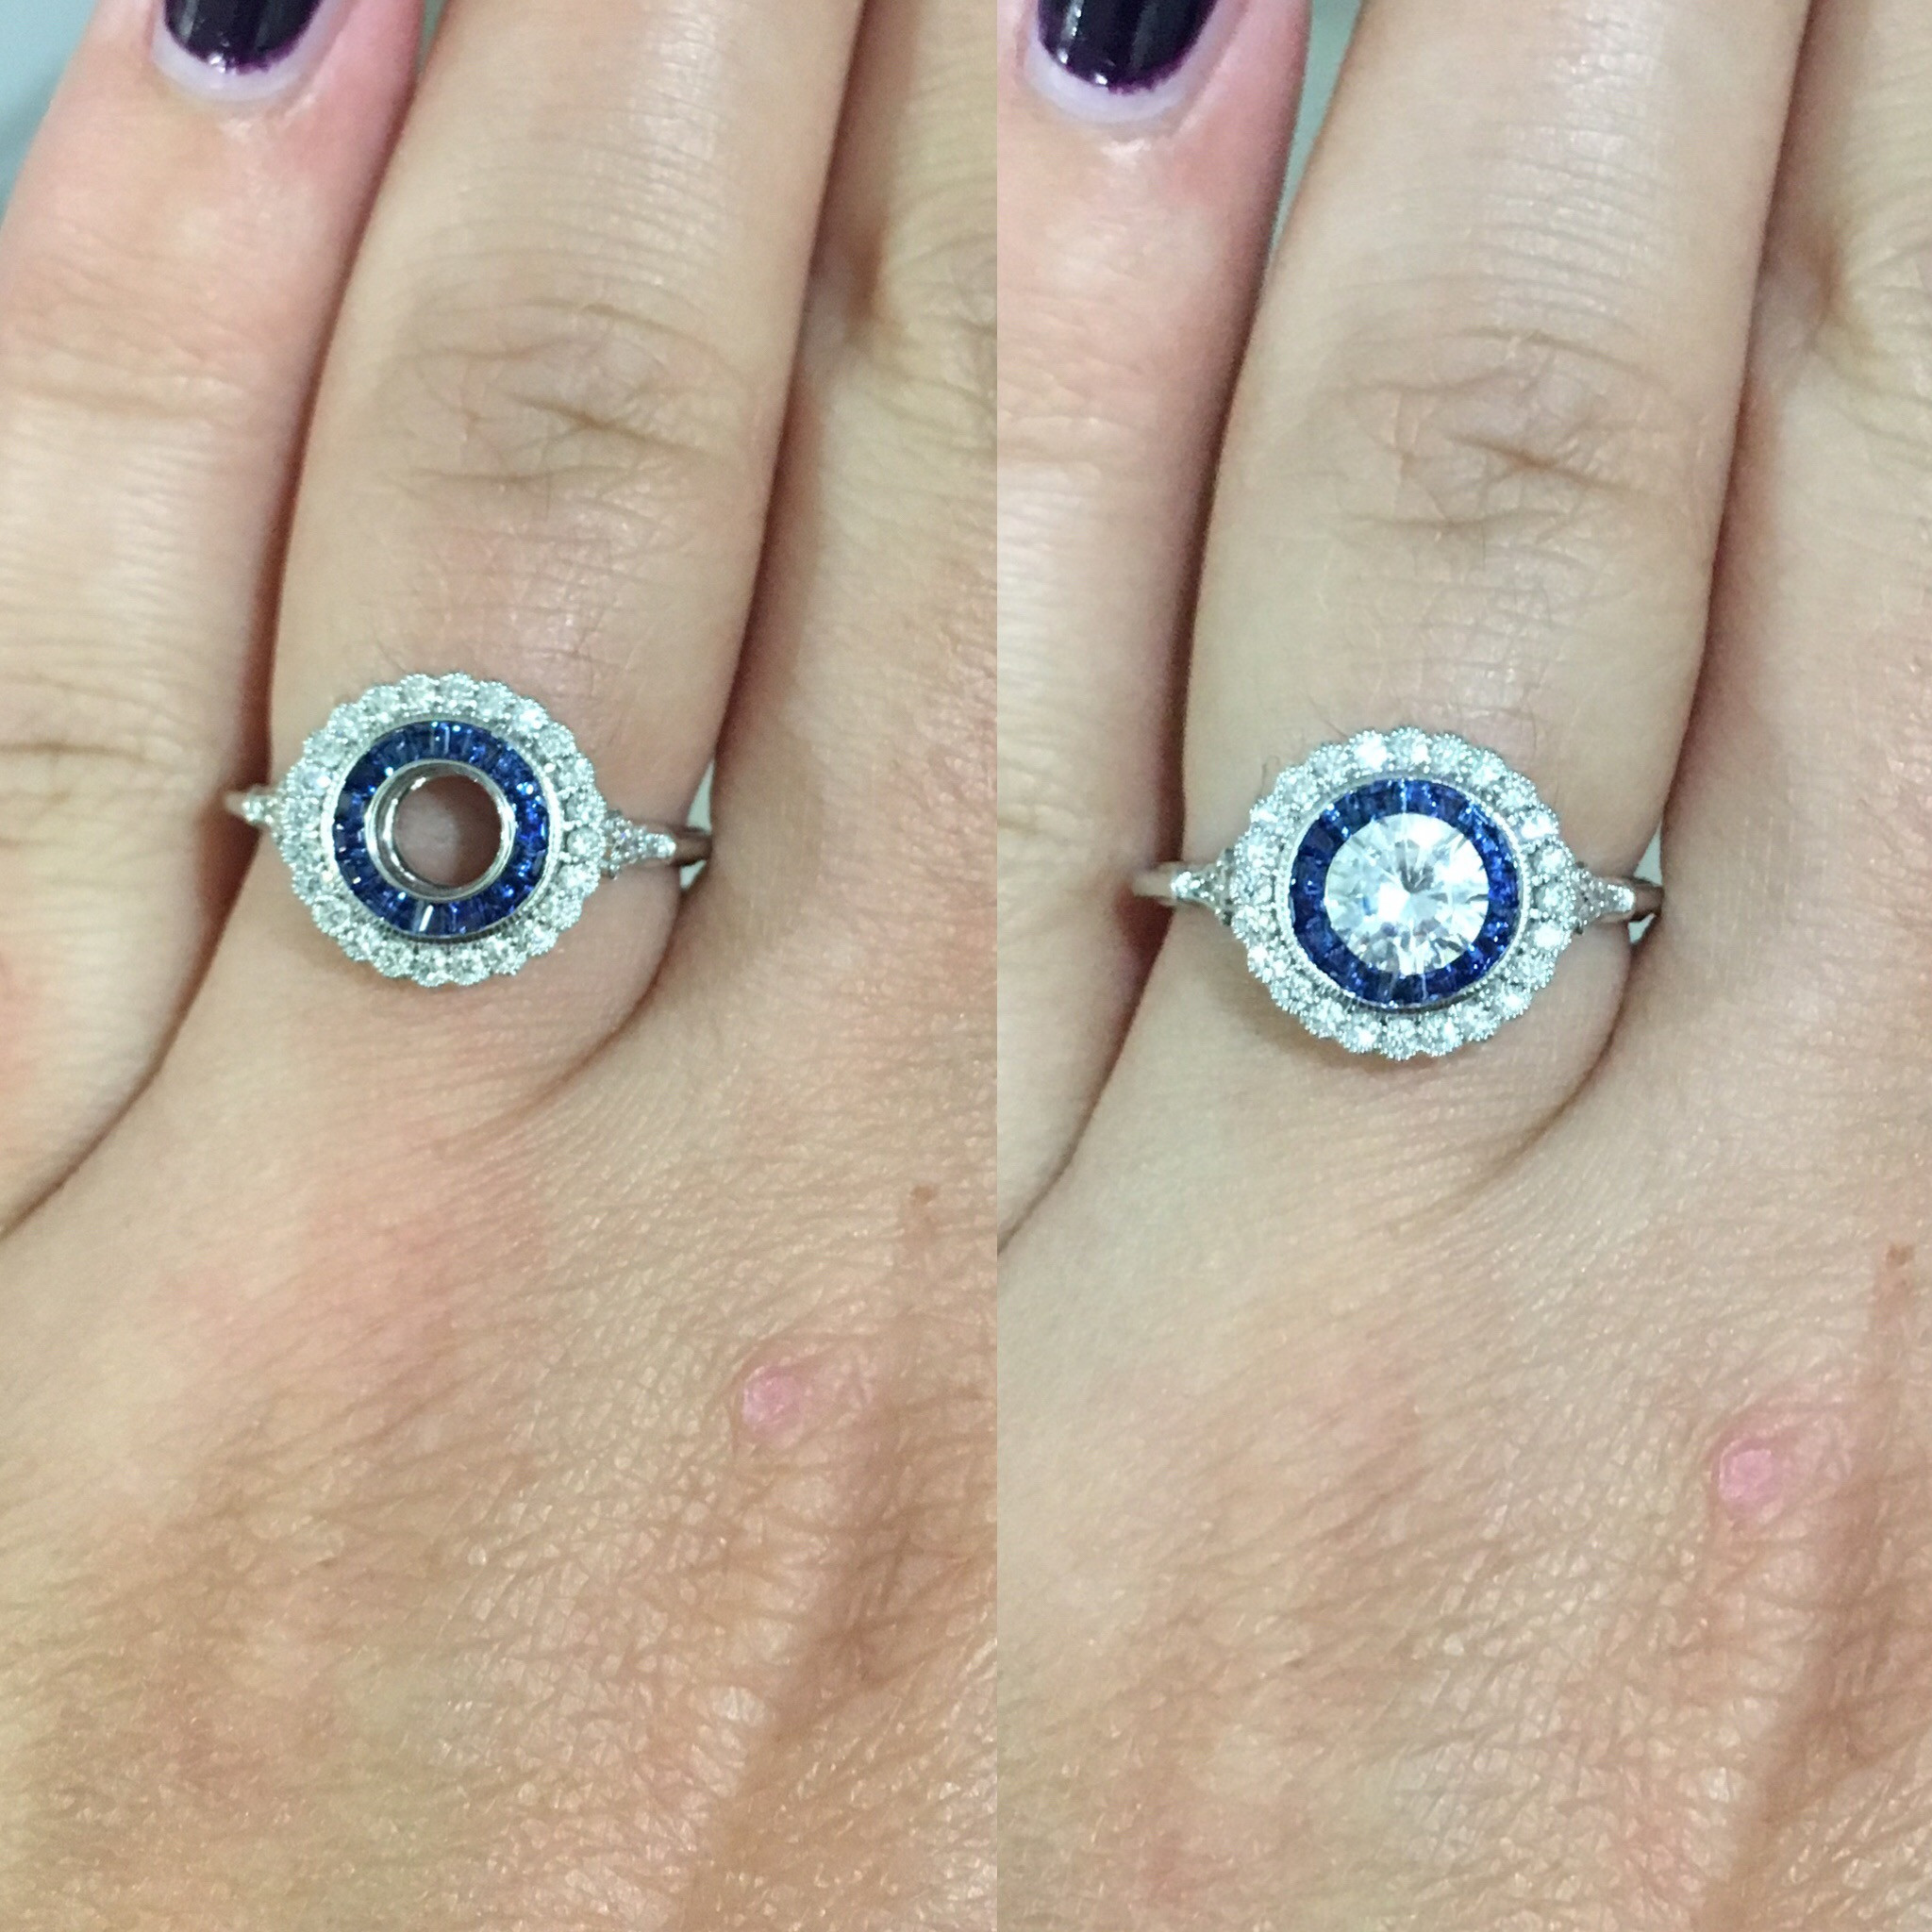 Target Wedding Rings
 Show me your art deco tar diamond with sapphire halo rings